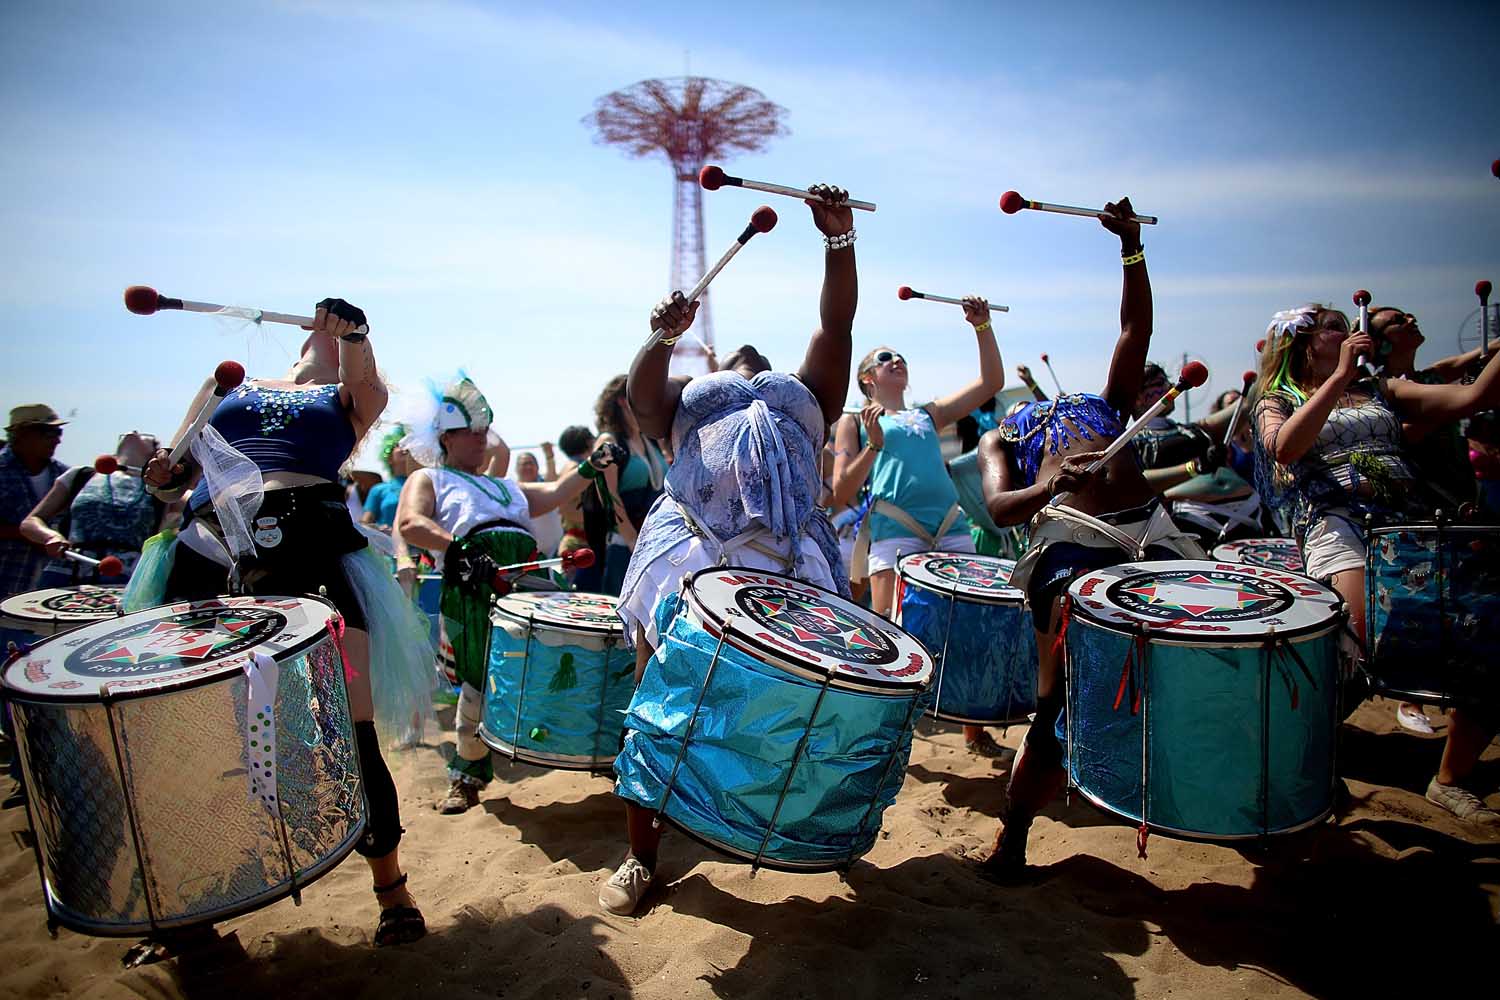 June 22, 2013. Musicians perform on the beach at the 2013 Mermaid Parade at Coney Island in the Brooklyn, NY.